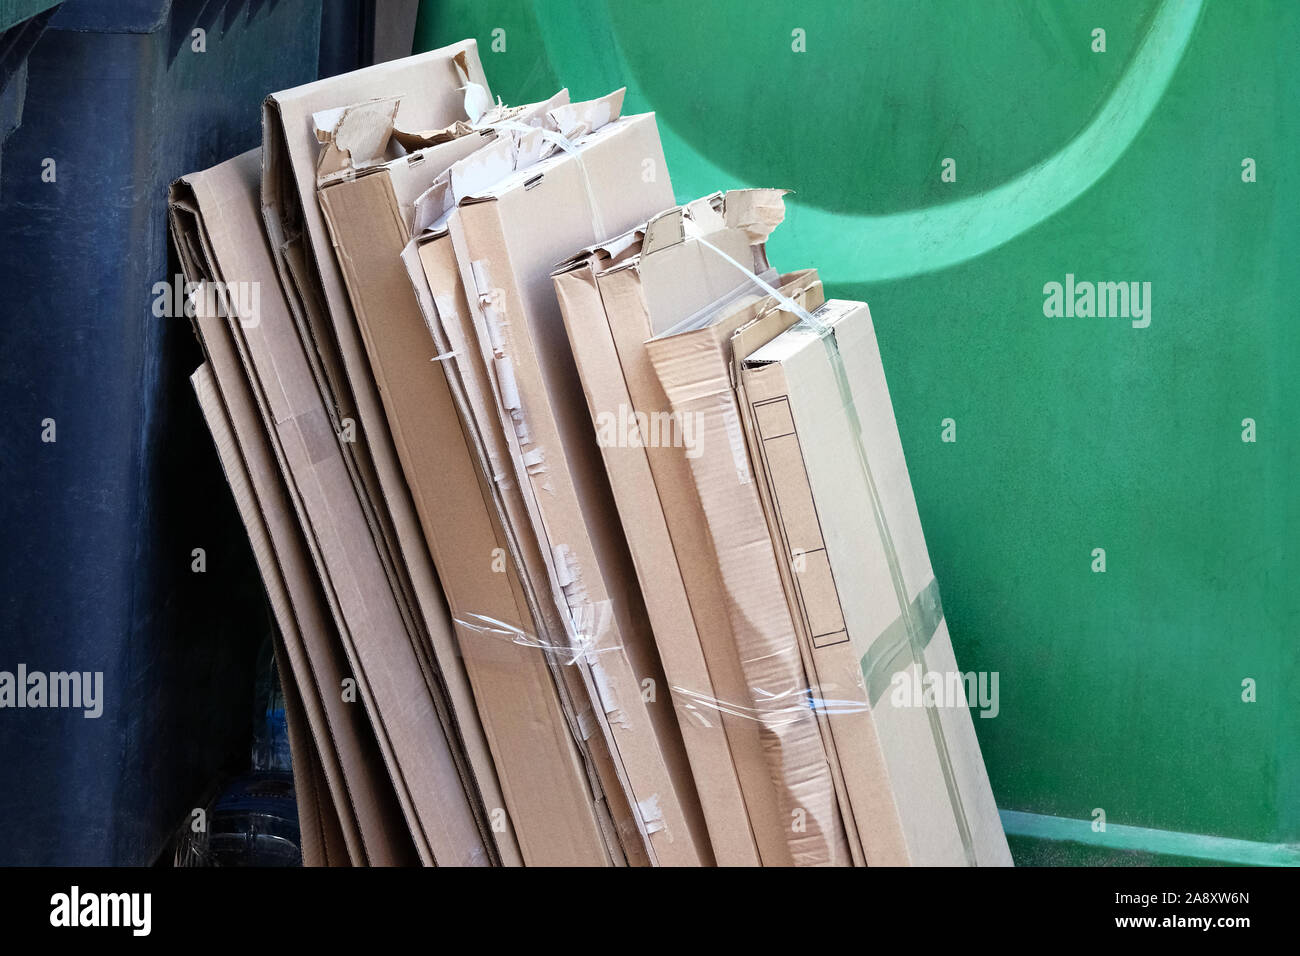 Cardboard and waste paper is collected and packaged for recycling. Cardboard is bundled into bales. Urban Recycling. Stock Photo